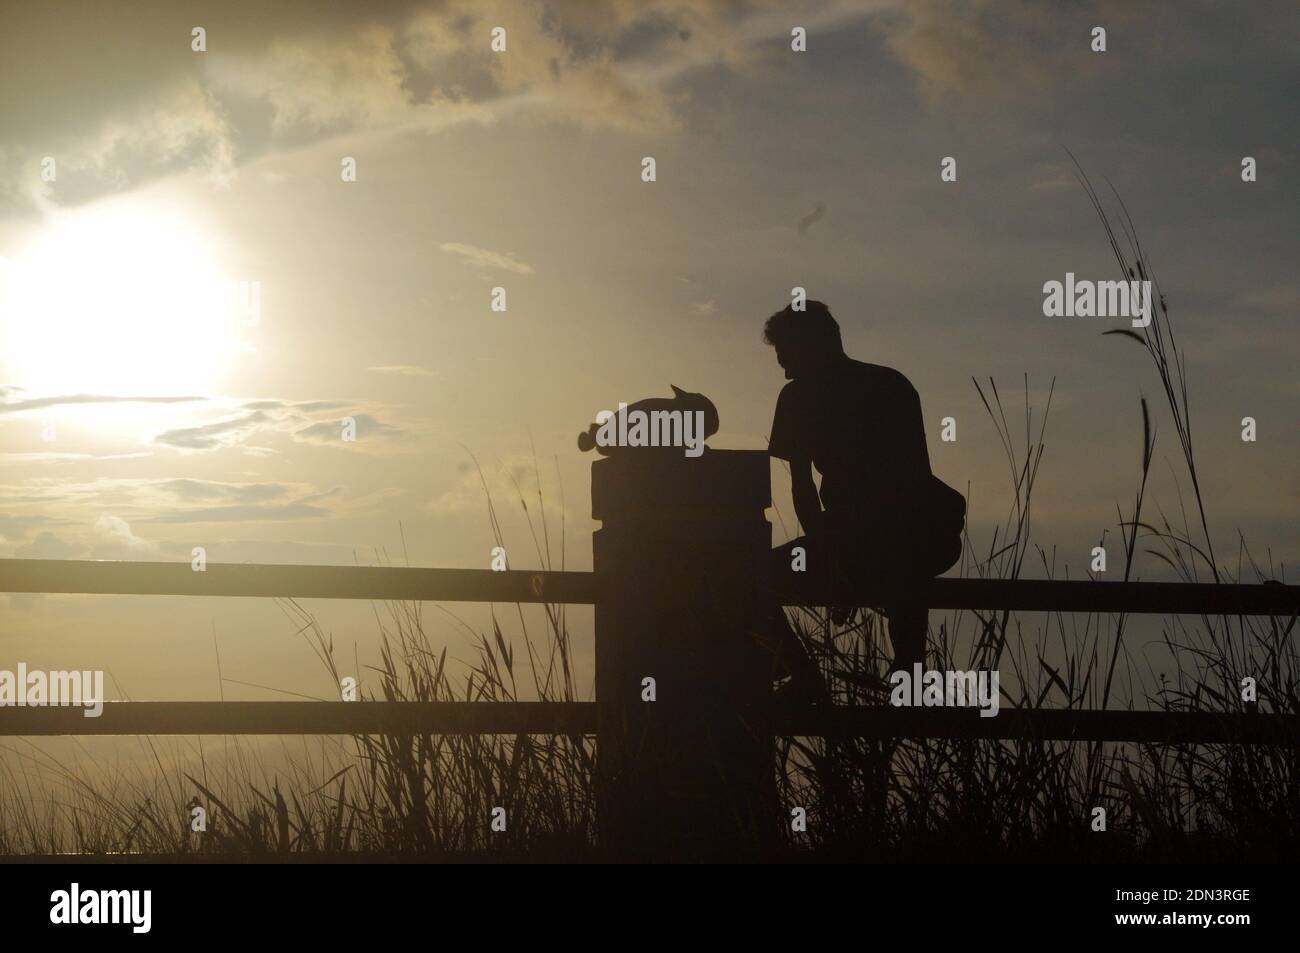 Silhouette Man Sitting On Railing Against Sky During Sunset Stock Photo